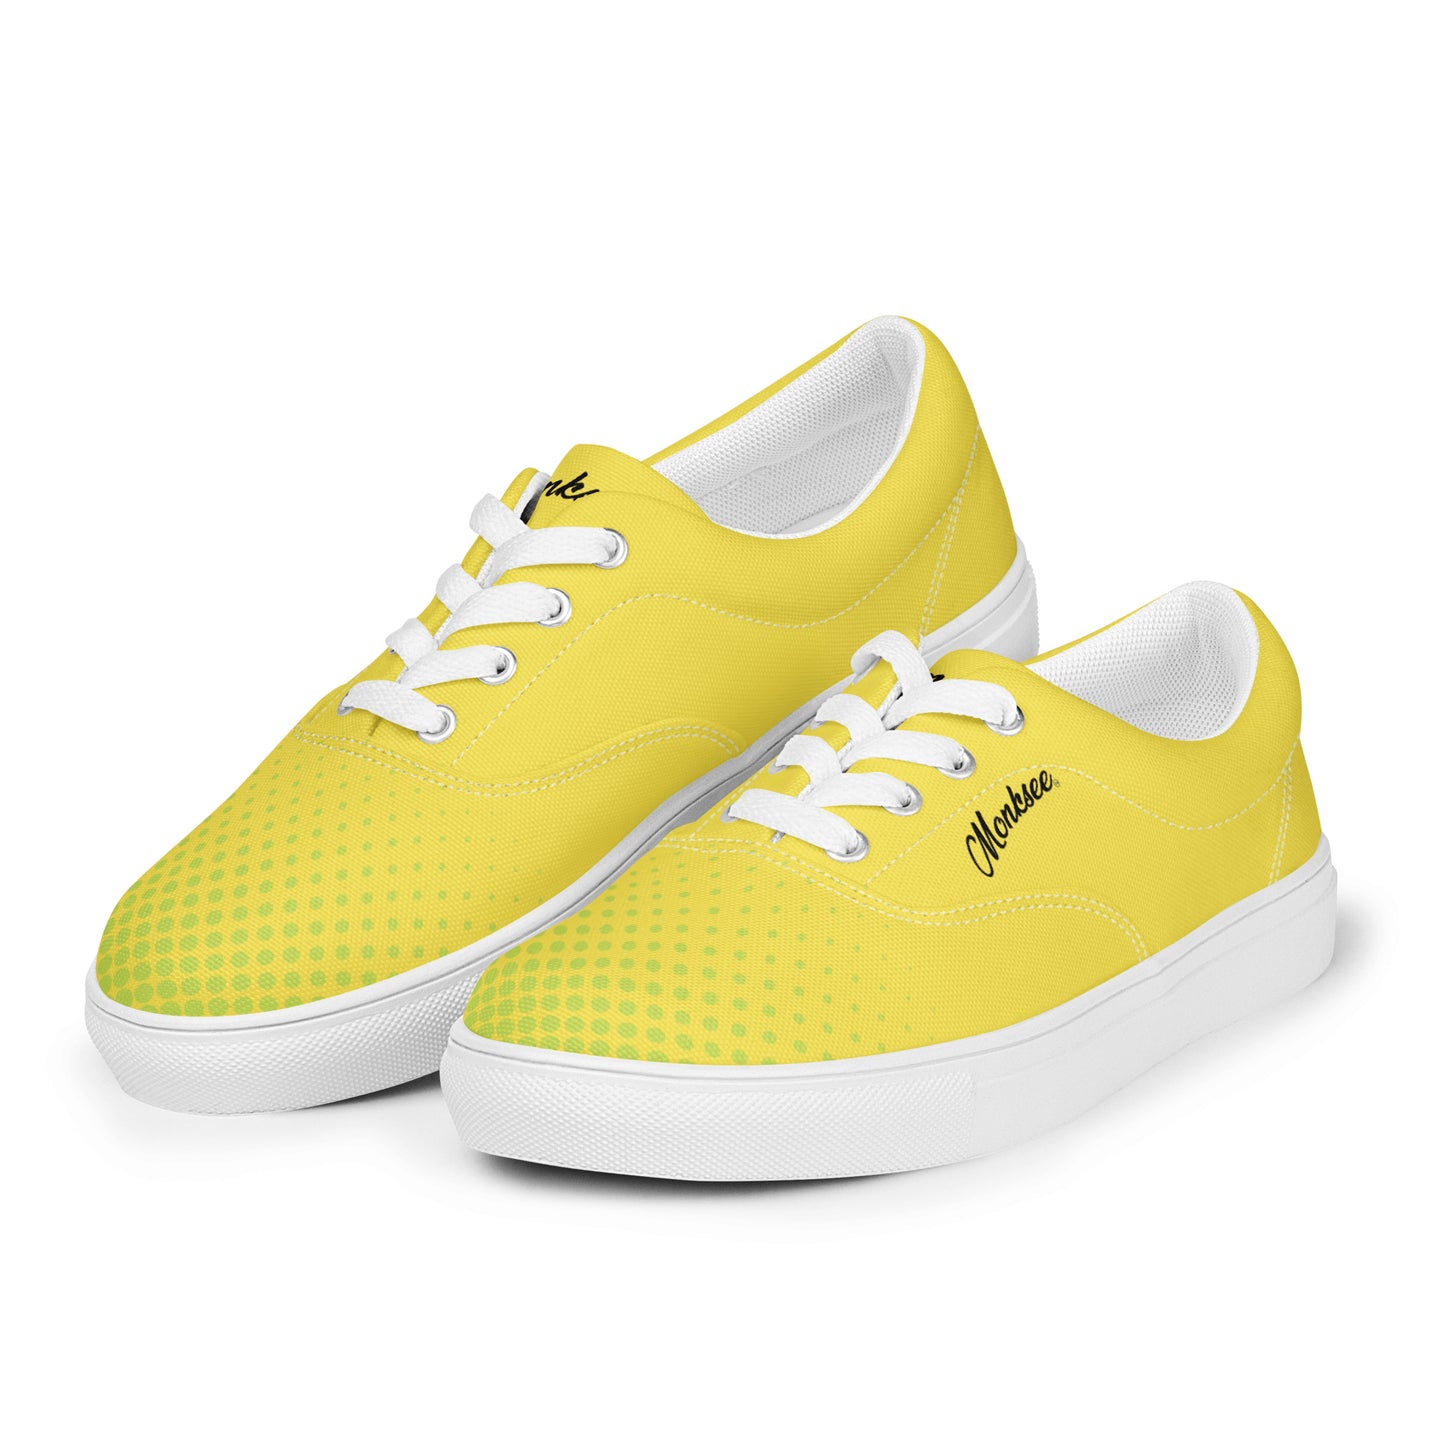 Monksee & Lime - Mens Canvas Shoes.